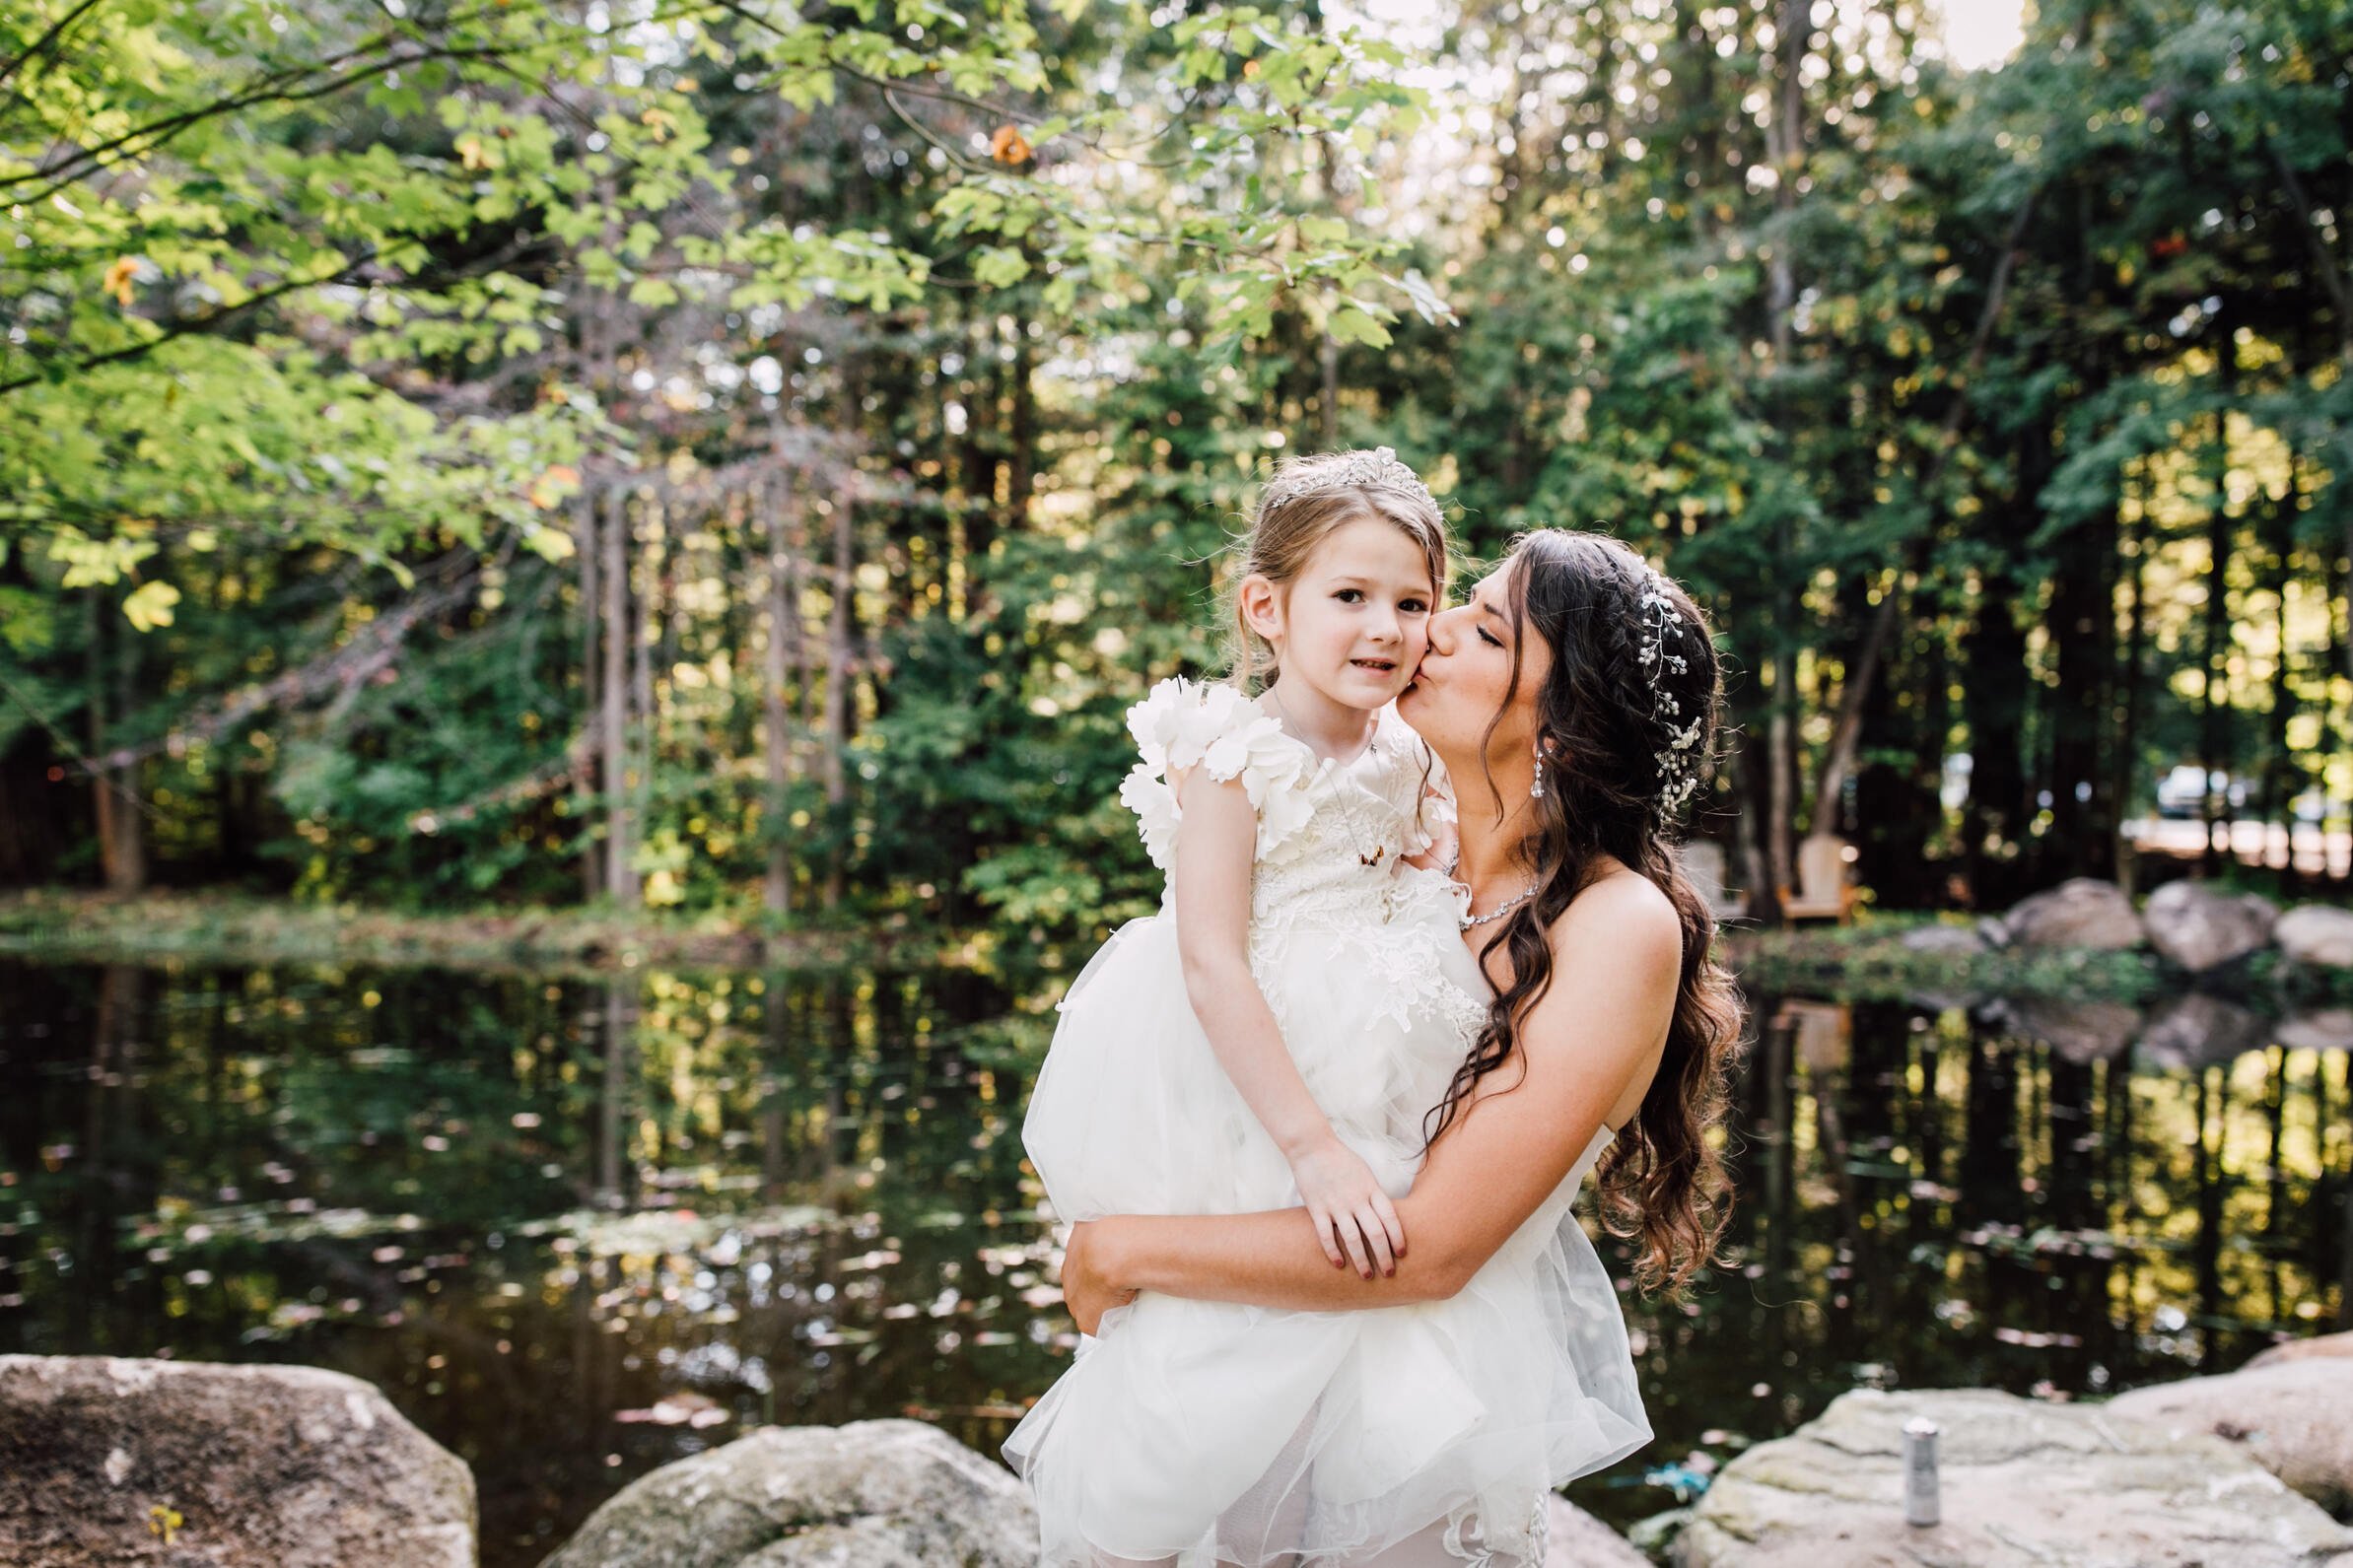  The bride kisses her daughter’s cheek at her outdoor fall wedding 